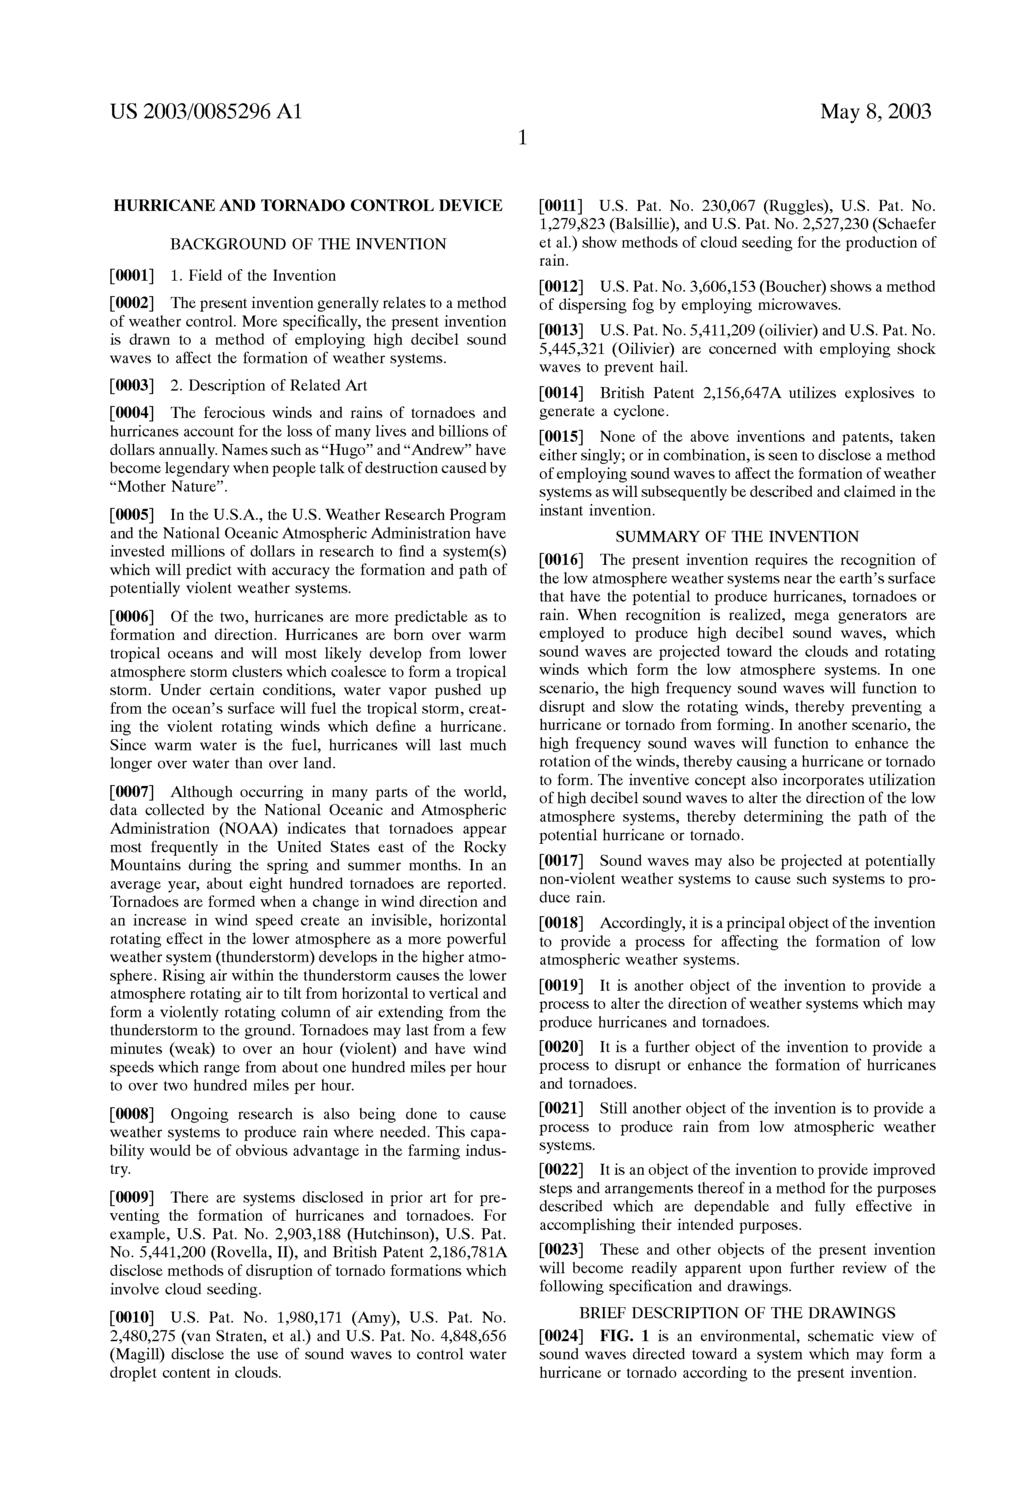 US 2003/0085296 A1 May 8, 2003 HURRICANE AND TORNADO CONTROL DEVICE BACKGROUND OF THE INVENTION 0001) 1.